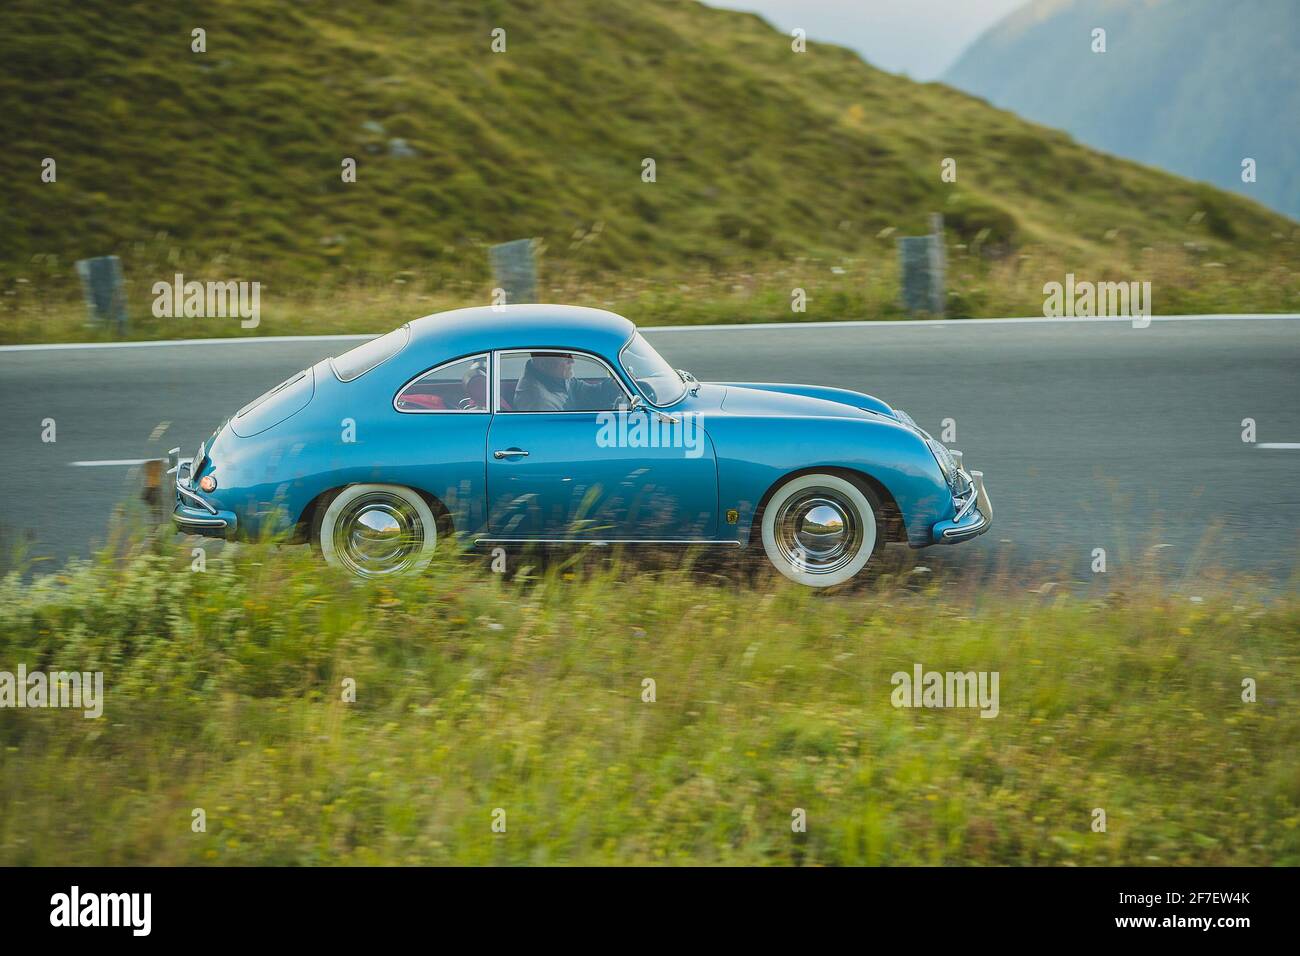 GROSSGLOCKNER, AUSTRIA, 17. AUGUST 2018: A vintage Porsche 356 sports car in blue color and whitewall tires is racing downhill over the pass of Grossg Stock Photo